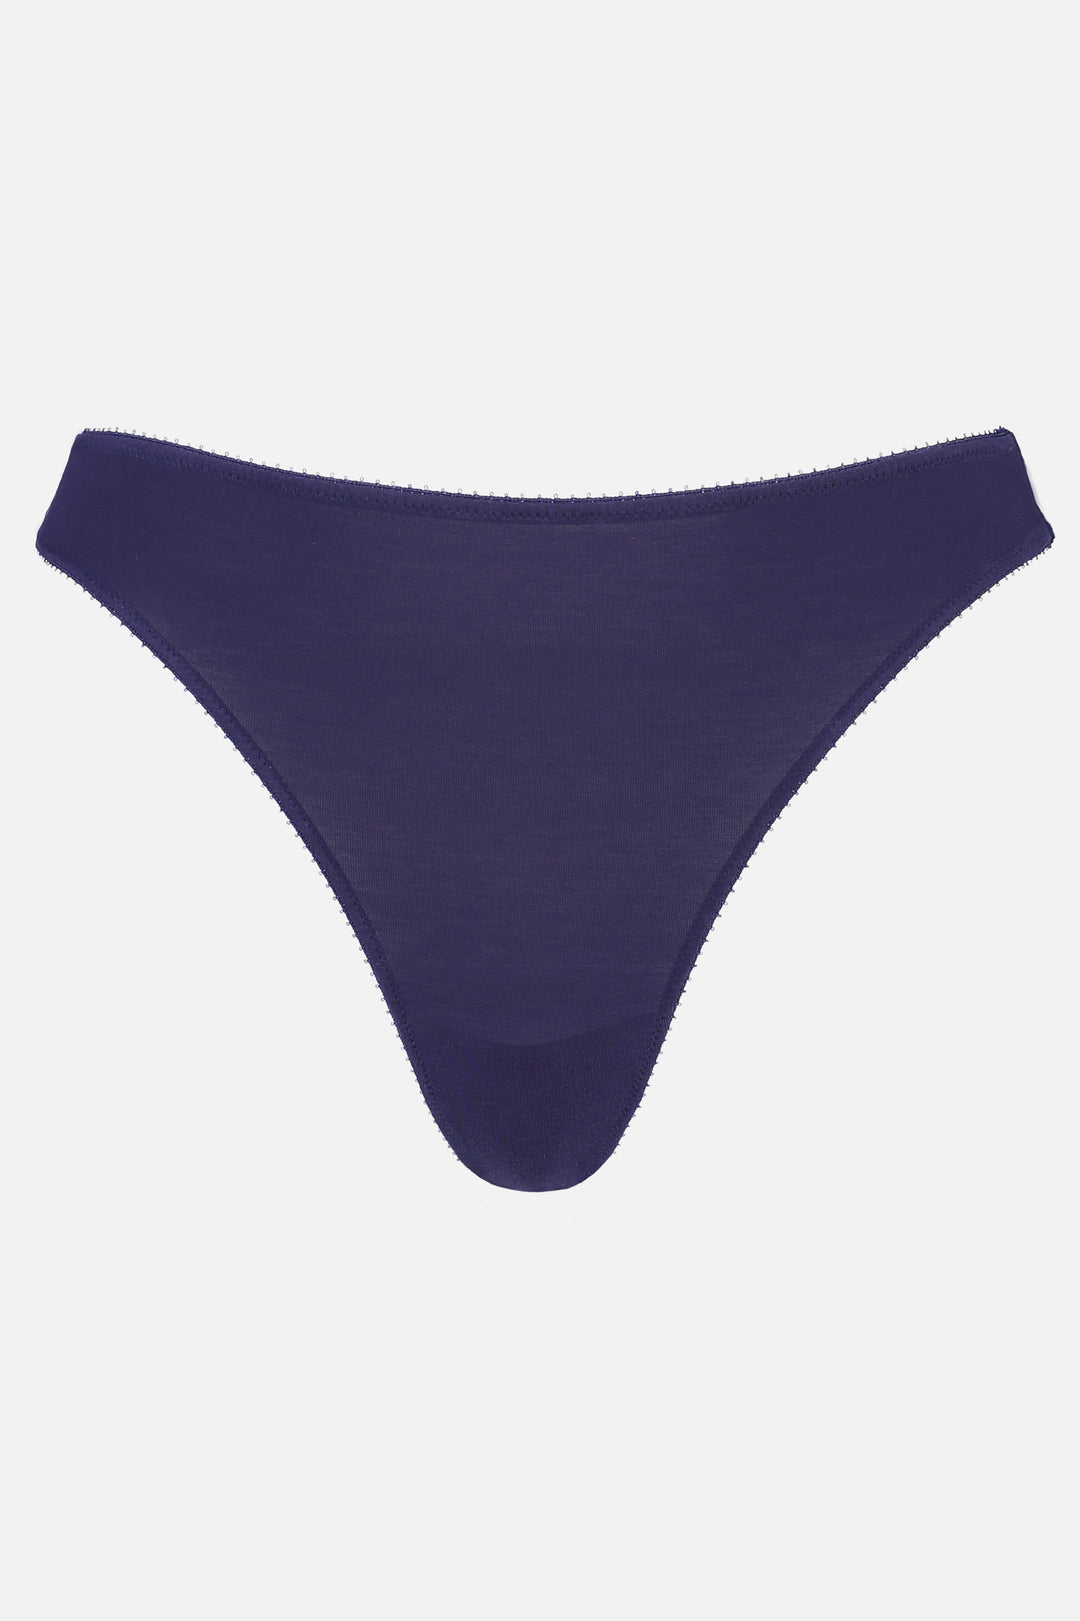 Videris Lingerie bikini knicker in indigo TENCEL™ a comfortable mid-rise style cut to follow the natural curve of your hips